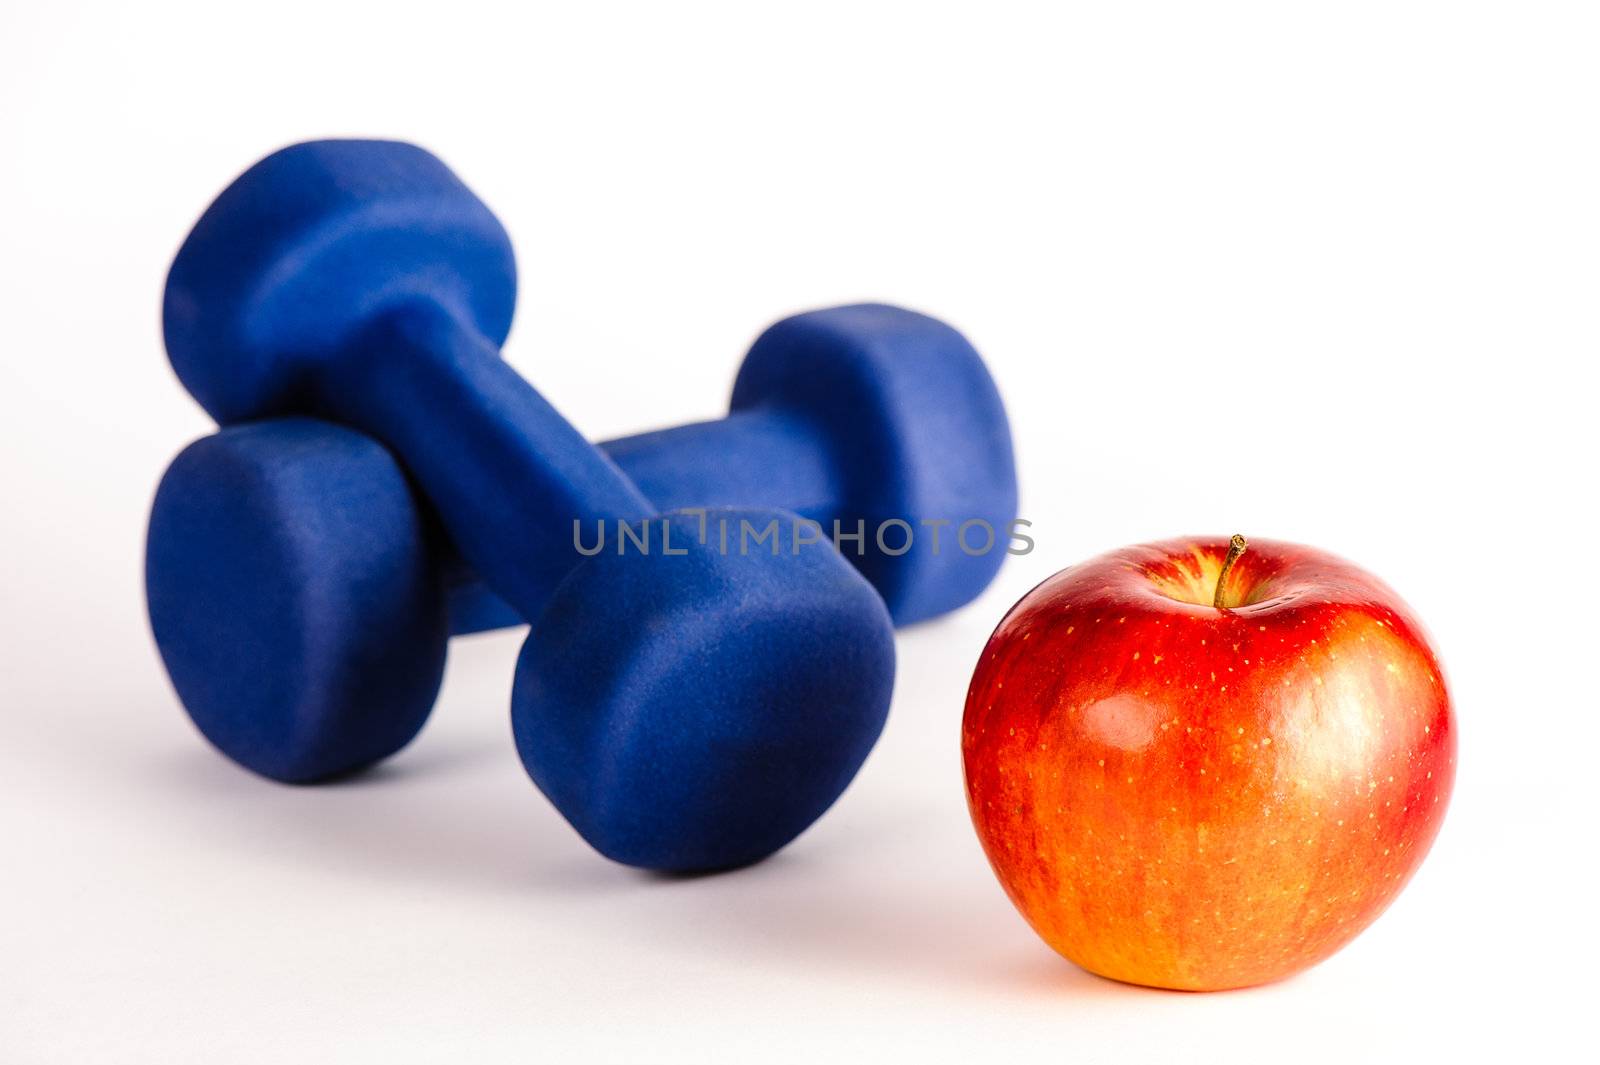 Blue dumbbells and red apple by nvelichko